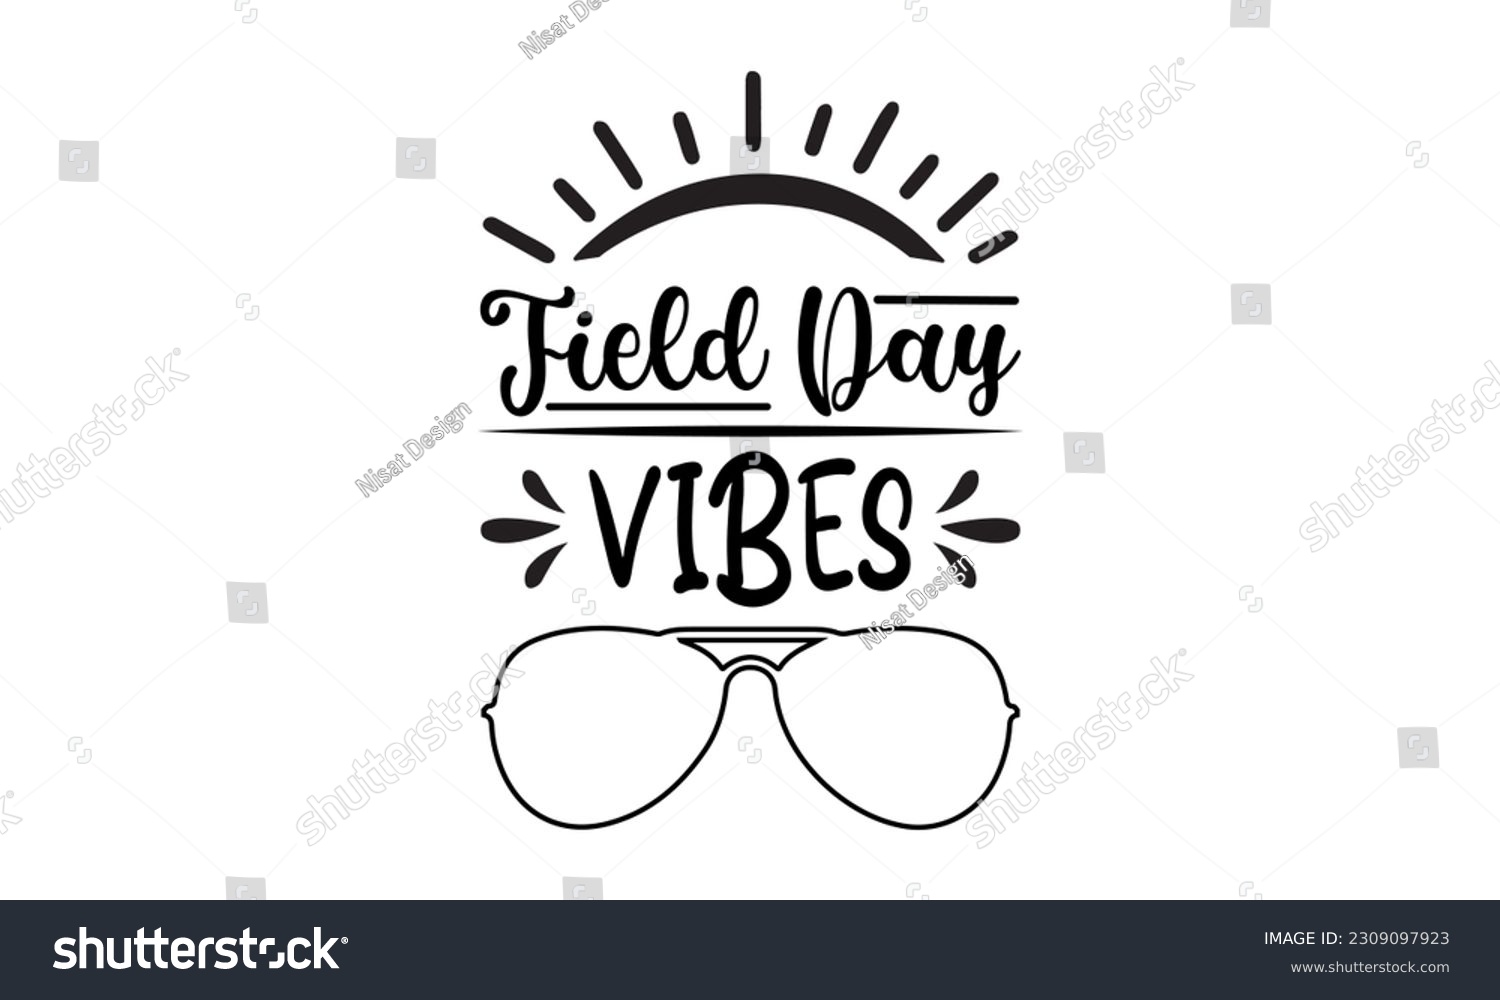 SVG of Field Day Vibes - Field Day Vector And Clip Art svg